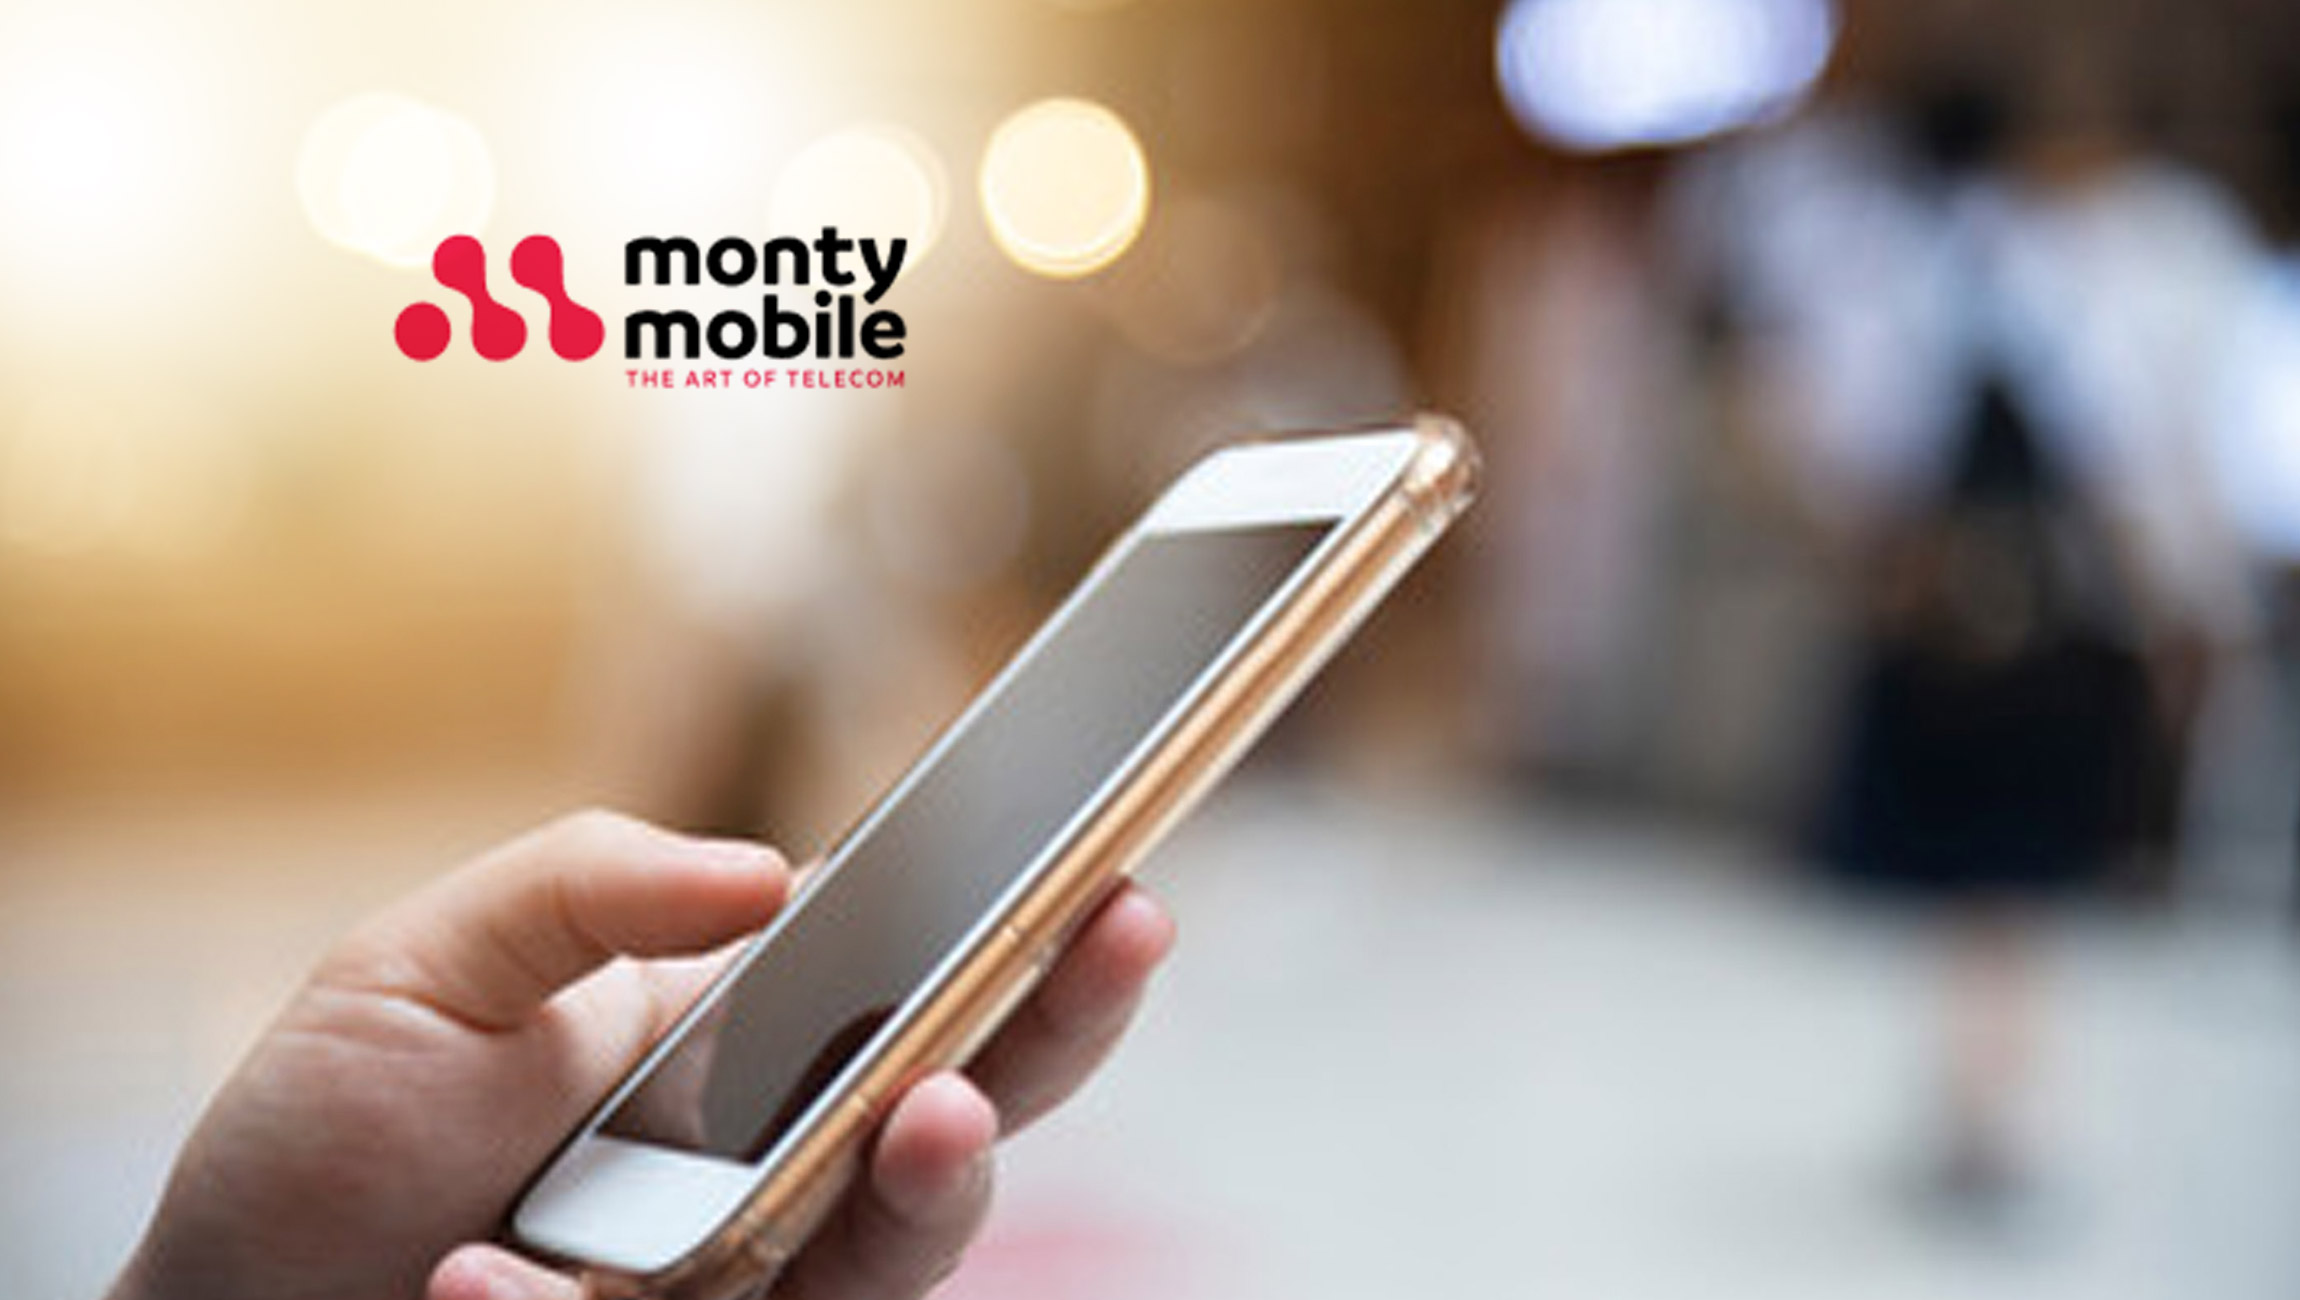 Monty Mobile launches new innovative technologies for enterprises at Mobile World Congress 2022